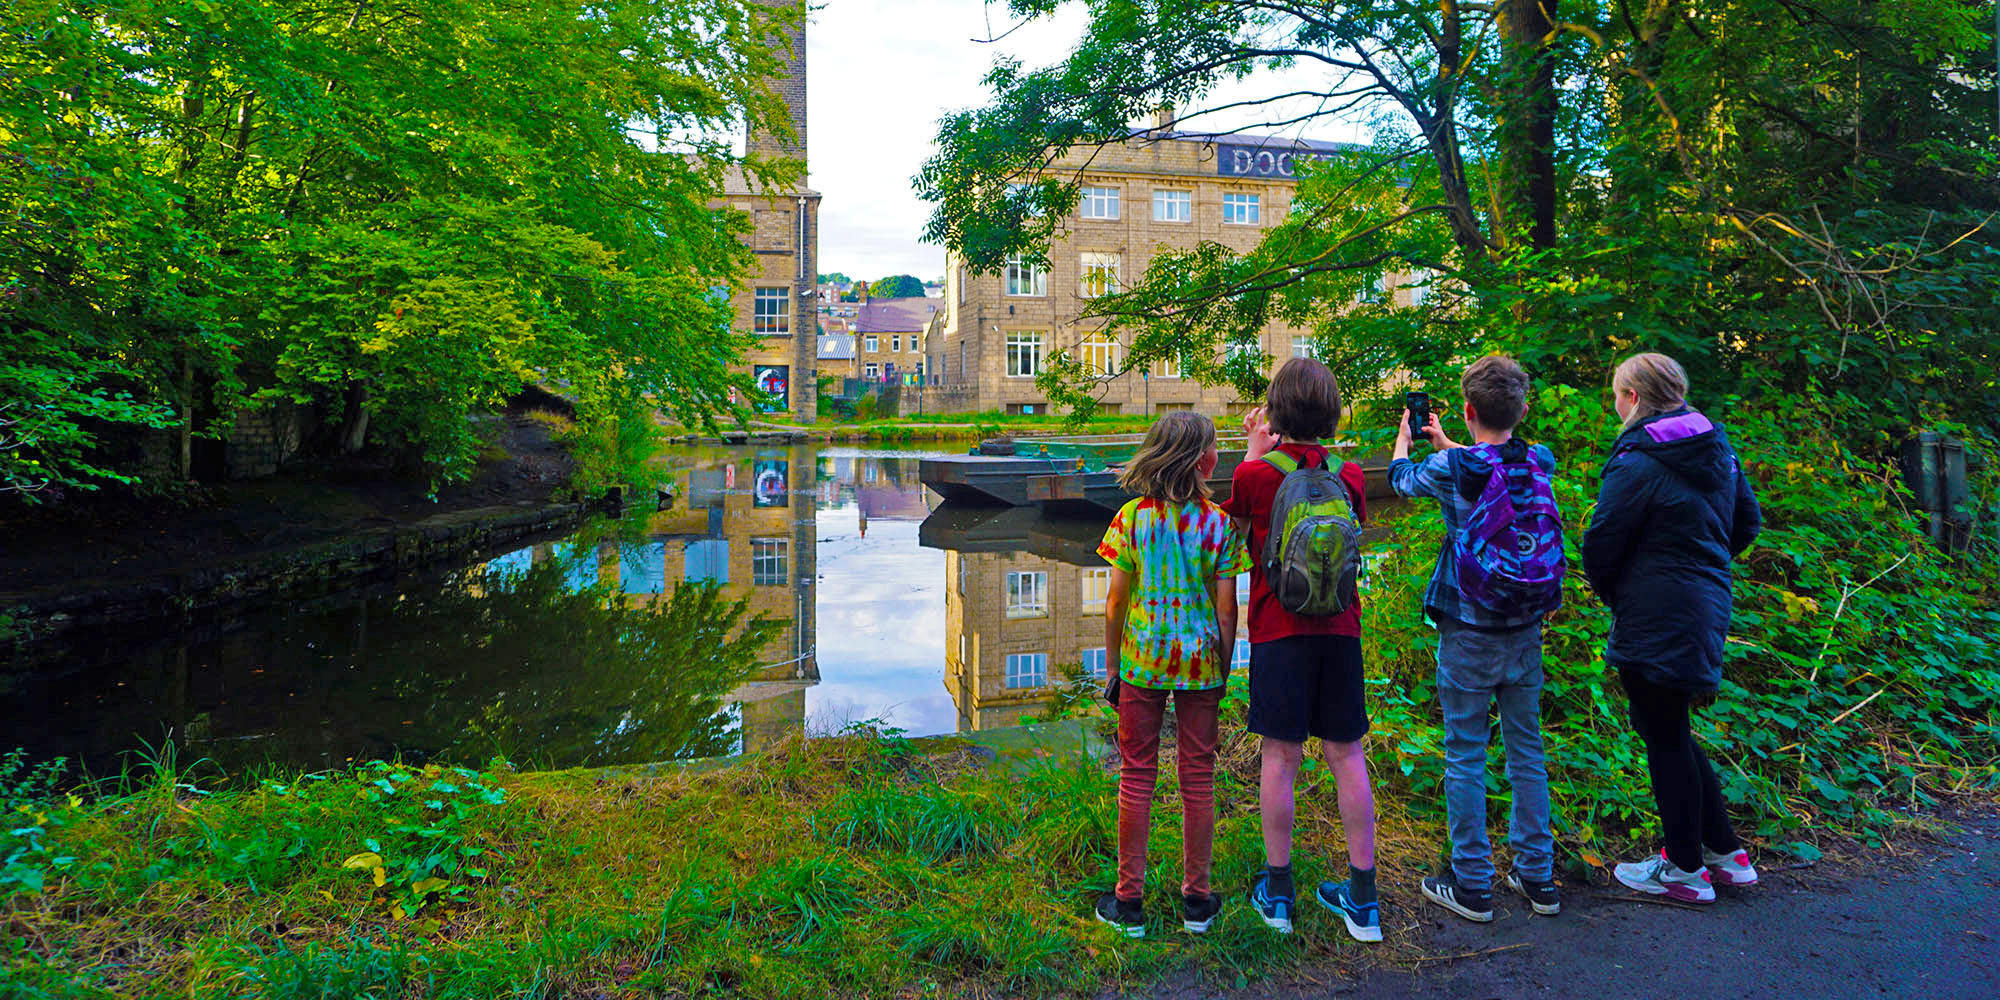 Three children stand on a canal bank, photographing the canal and industrial landscape through overhanging trees.